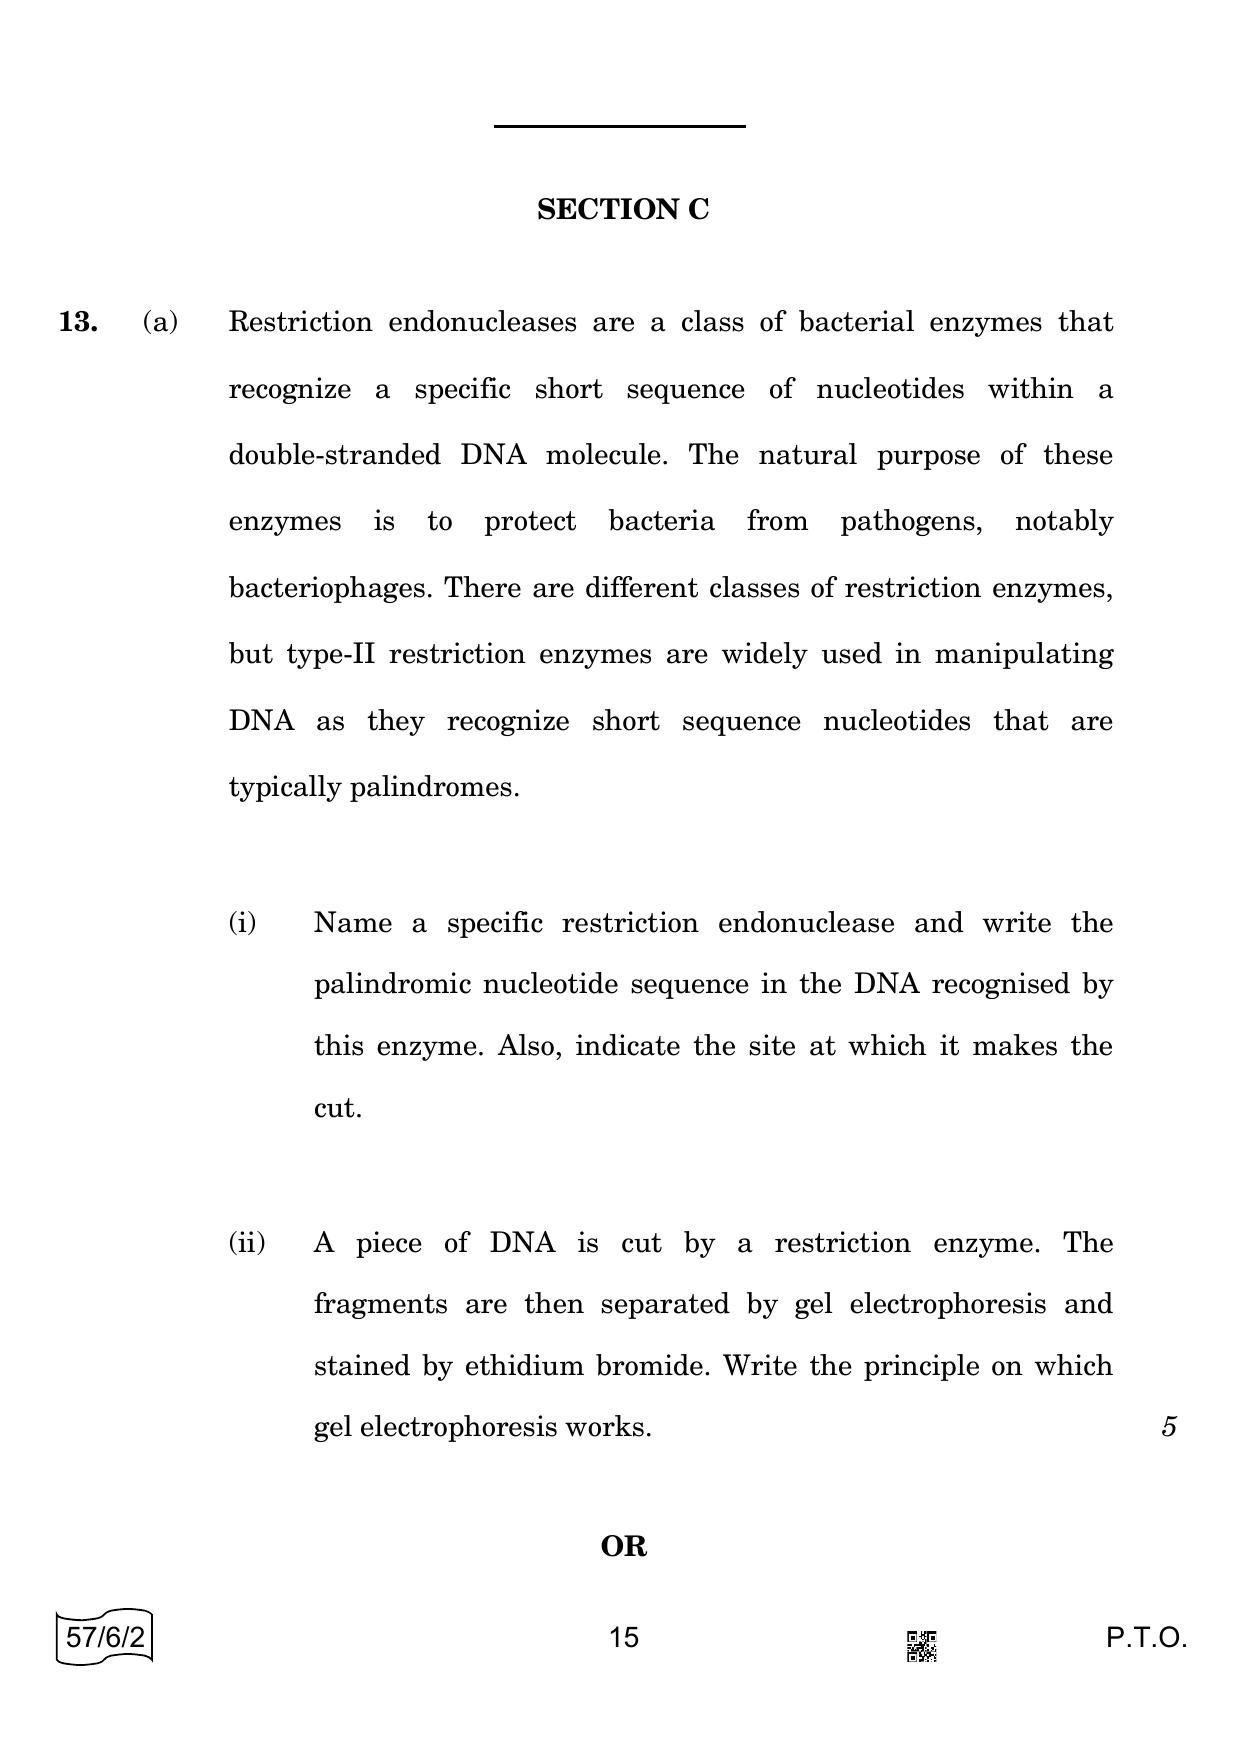 CBSE Class 12 57-6-2 BIOLOGY 2022 Compartment Question Paper - Page 15